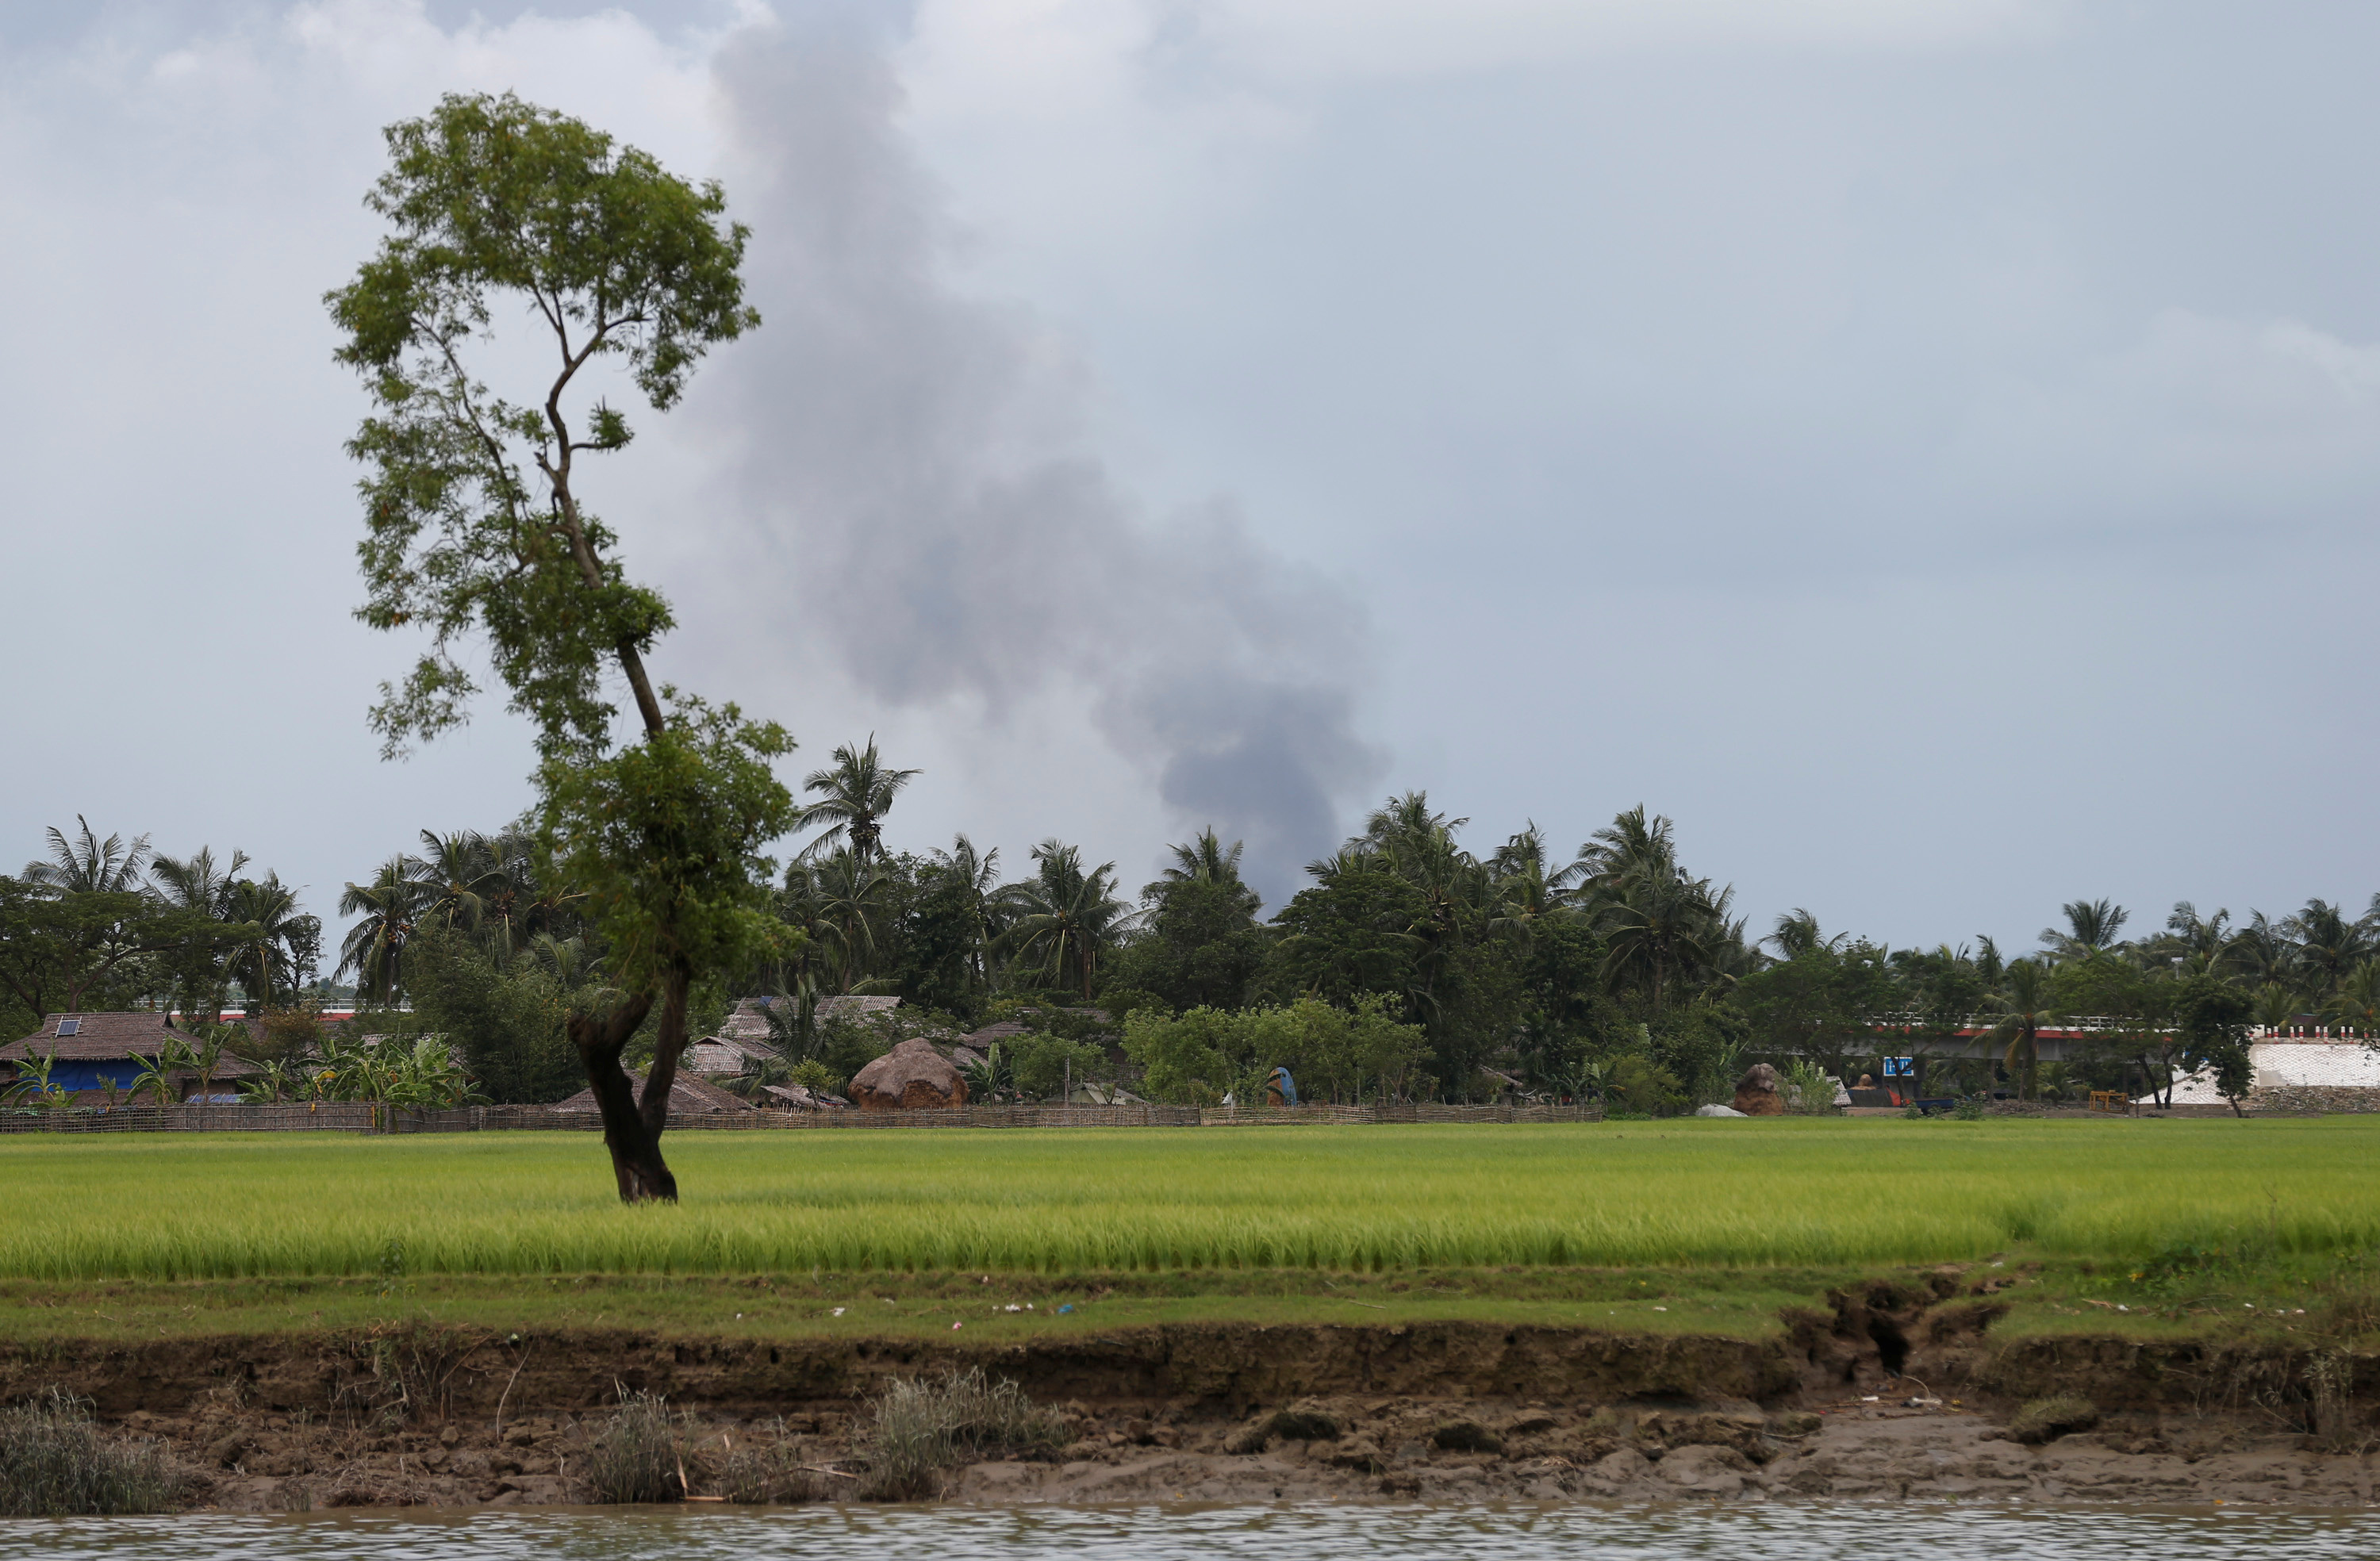 Fire smokes are seen over a village in Buthidaung